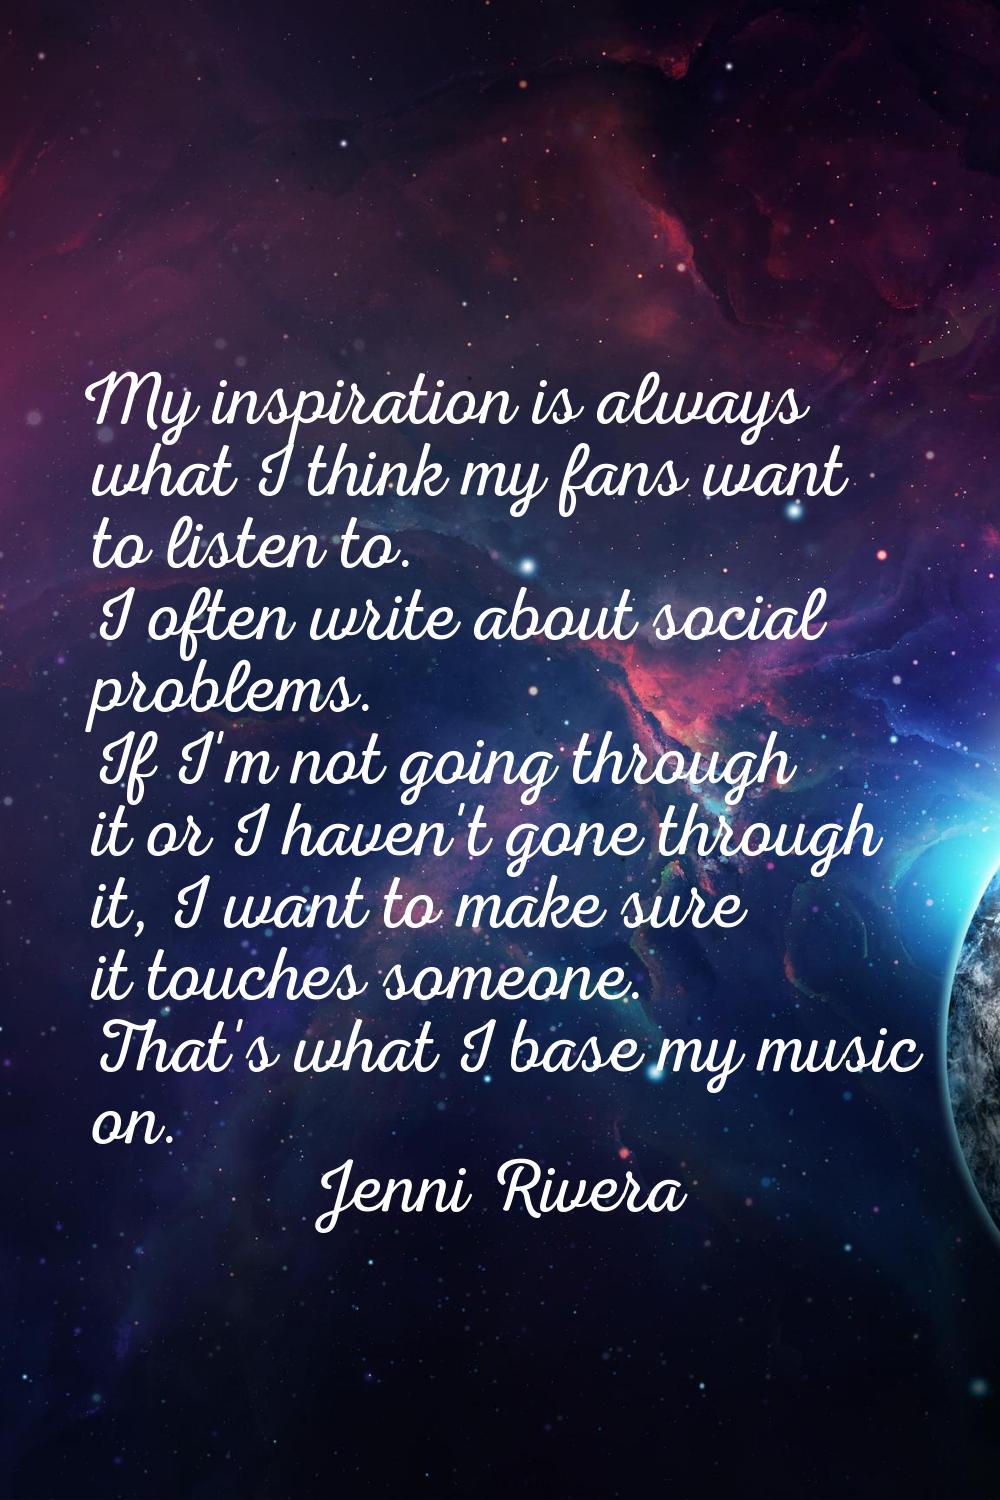 My inspiration is always what I think my fans want to listen to. I often write about social problem